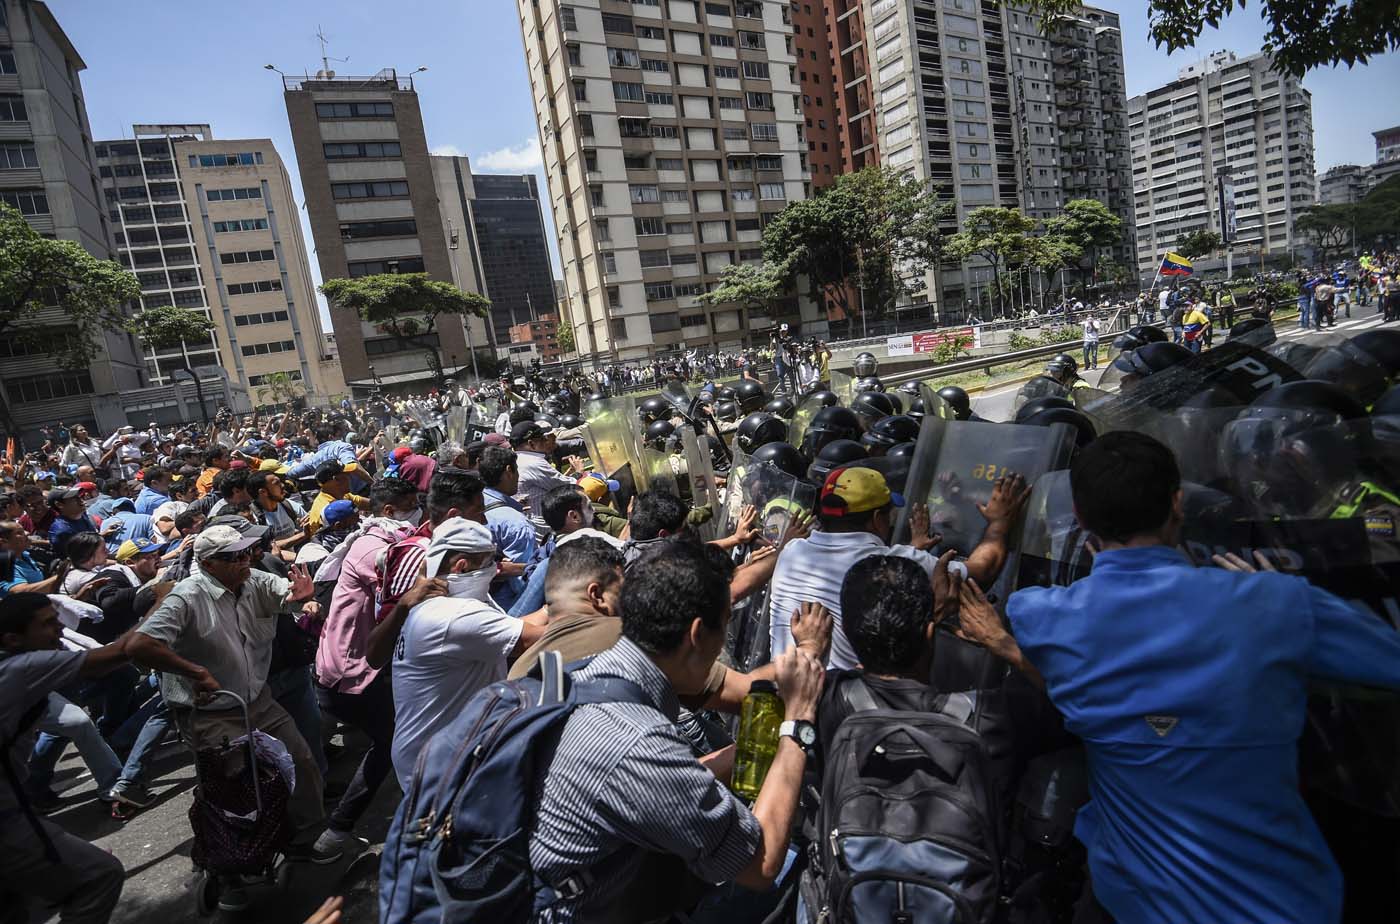 Venezuela's opposition activists clash with riot police agents during a protest against Nicolas Maduro's government in Caracas on April 4, 2017. Protesters clashed with police in Venezuela Tuesday as the opposition mobilized against moves to tighten President Nicolas Maduro's grip on power. Protesters hurled stones at riot police who fired tear gas as they blocked the demonstrators from advancing through central Caracas, where pro-government activists were also planning to march. / AFP PHOTO / JUAN BARRETO